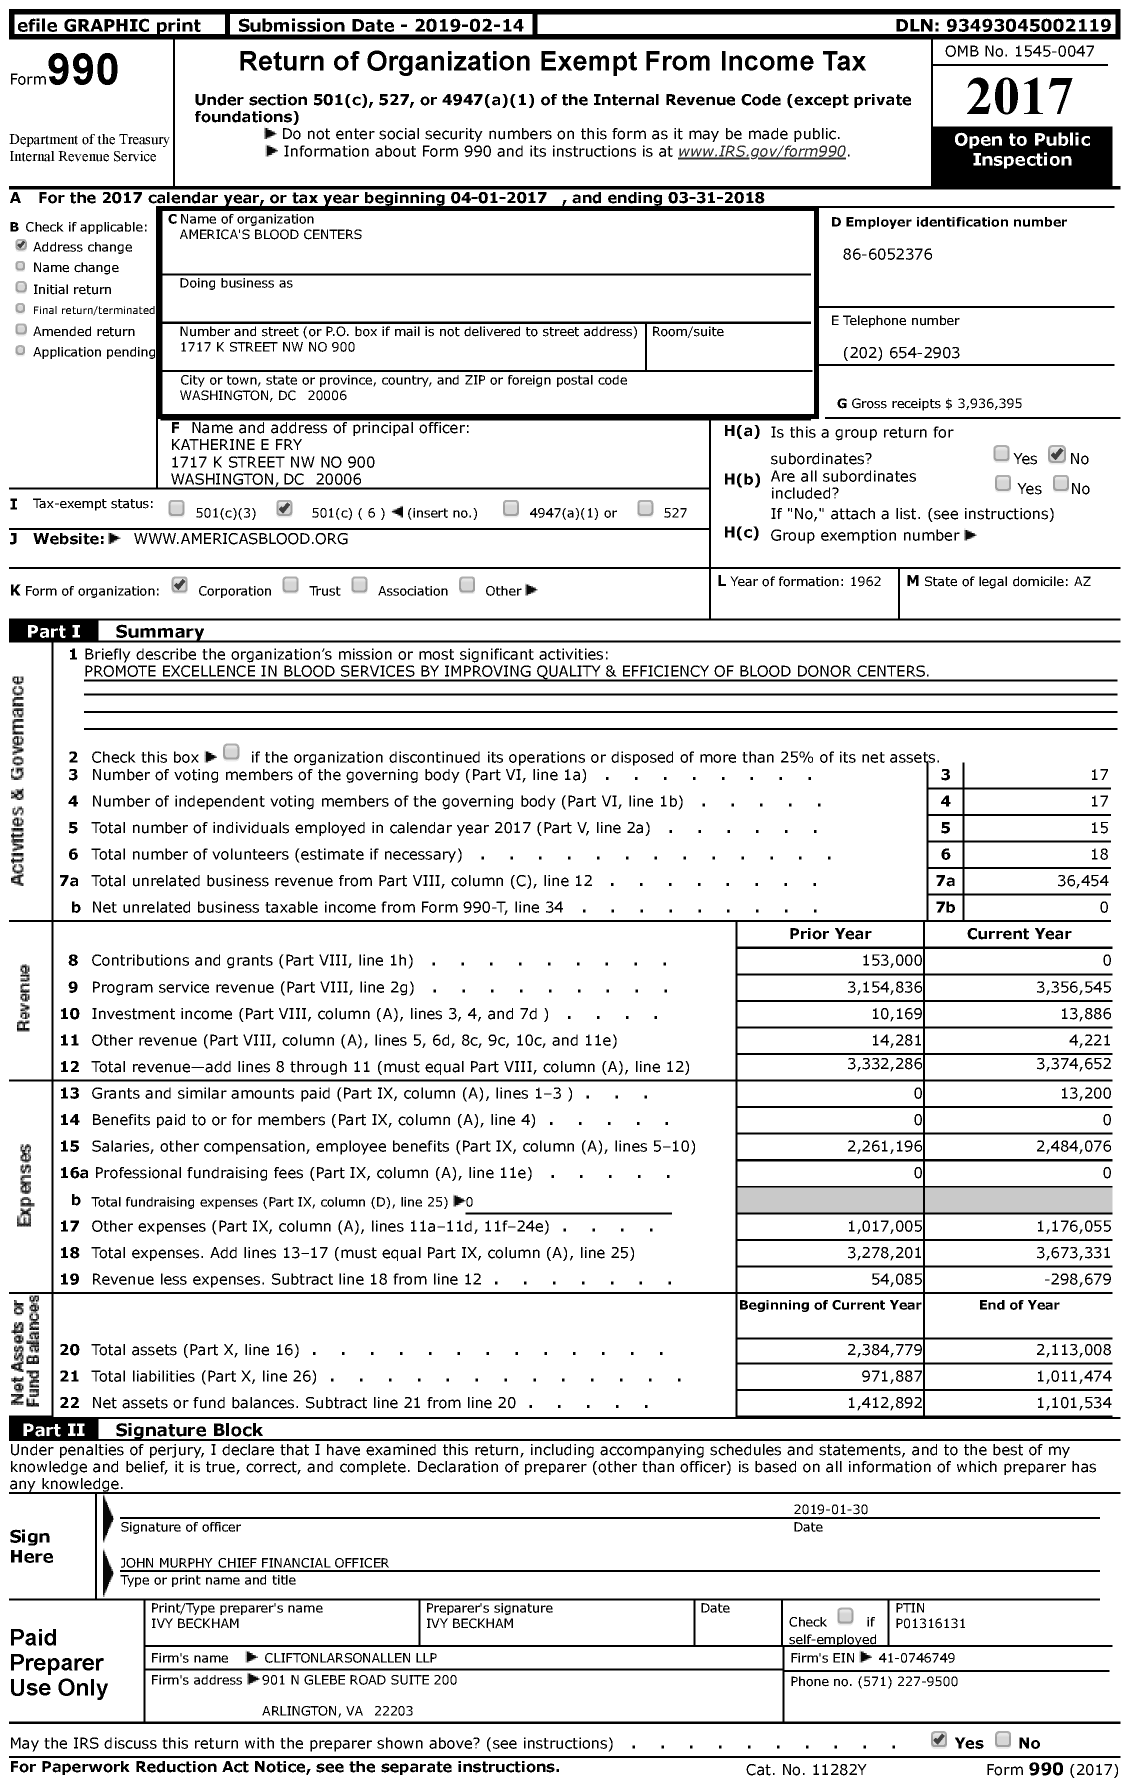 Image of first page of 2017 Form 990 for America's Blood Centers (ABC)